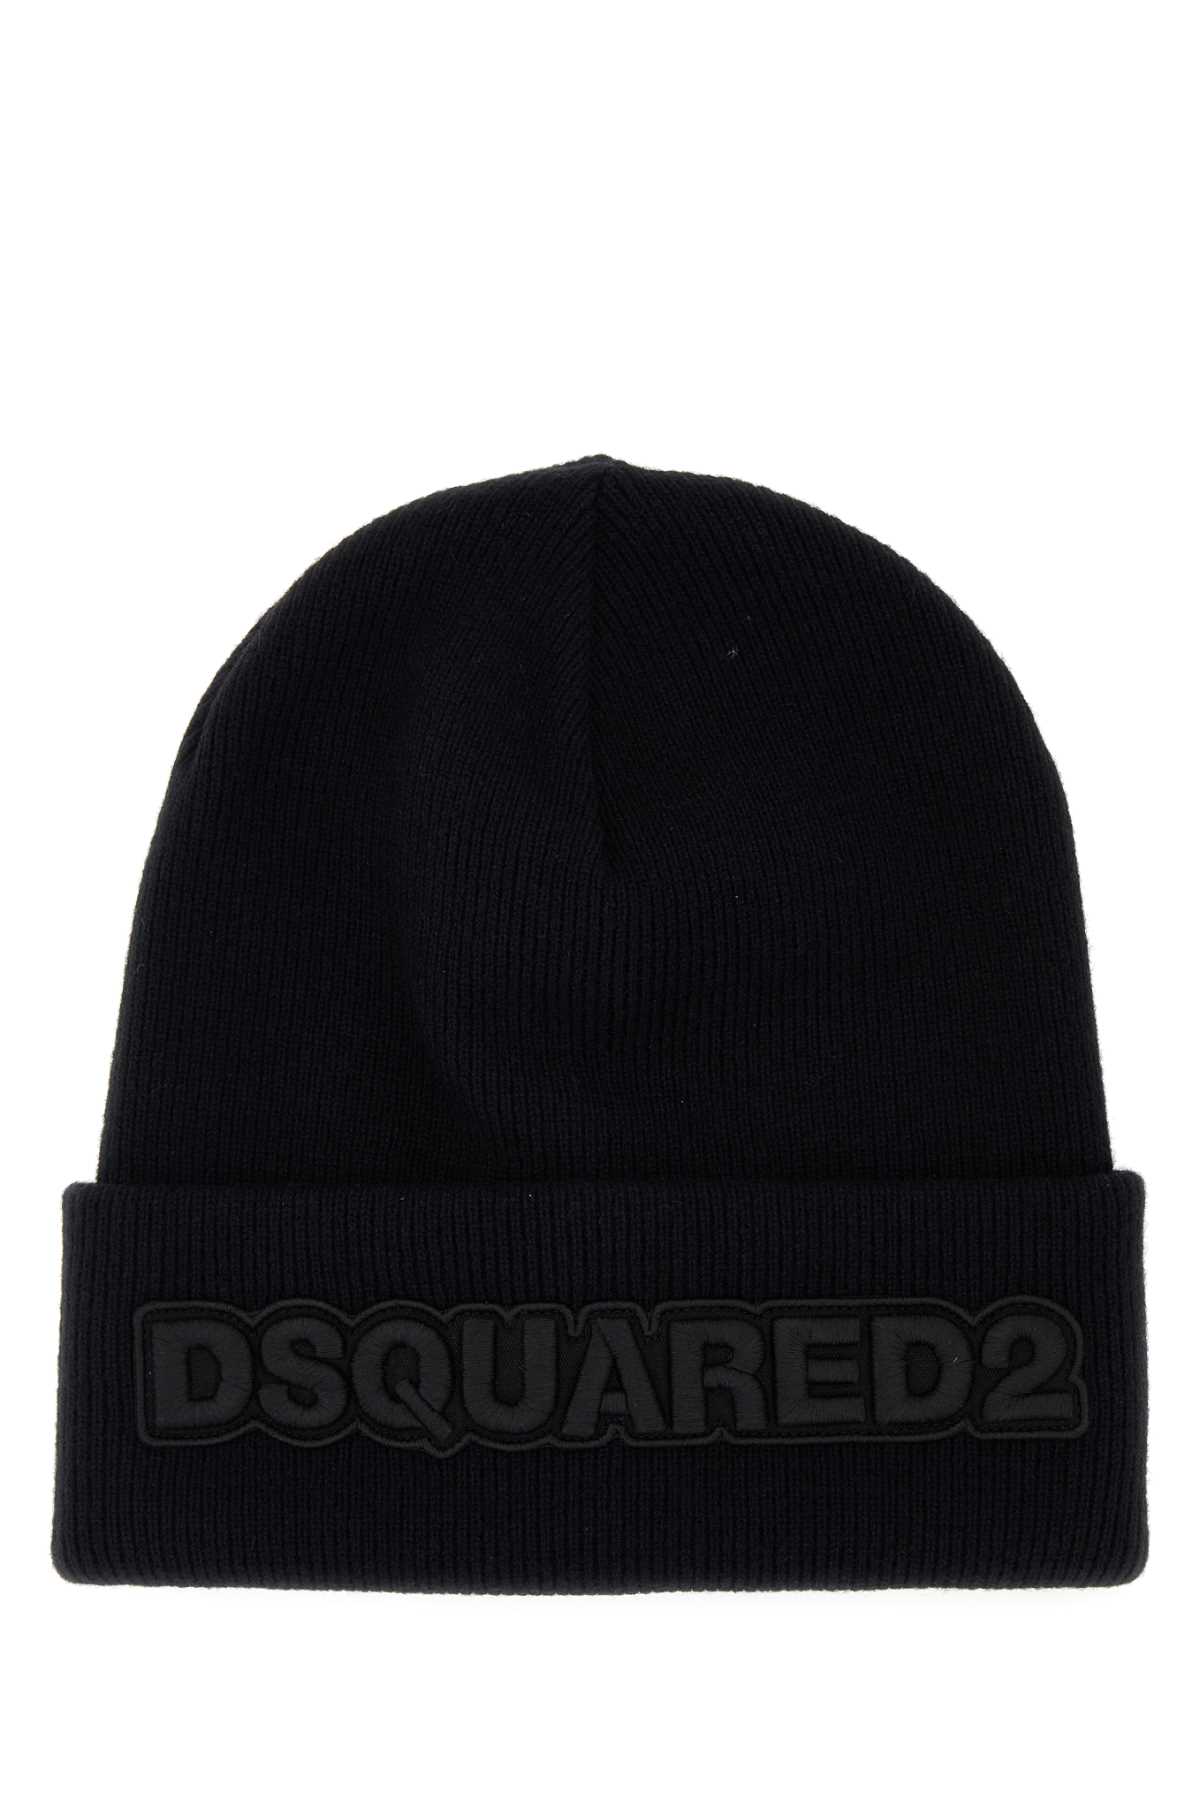 Shop Dsquared2 Black Wool Beanie Hat In M084